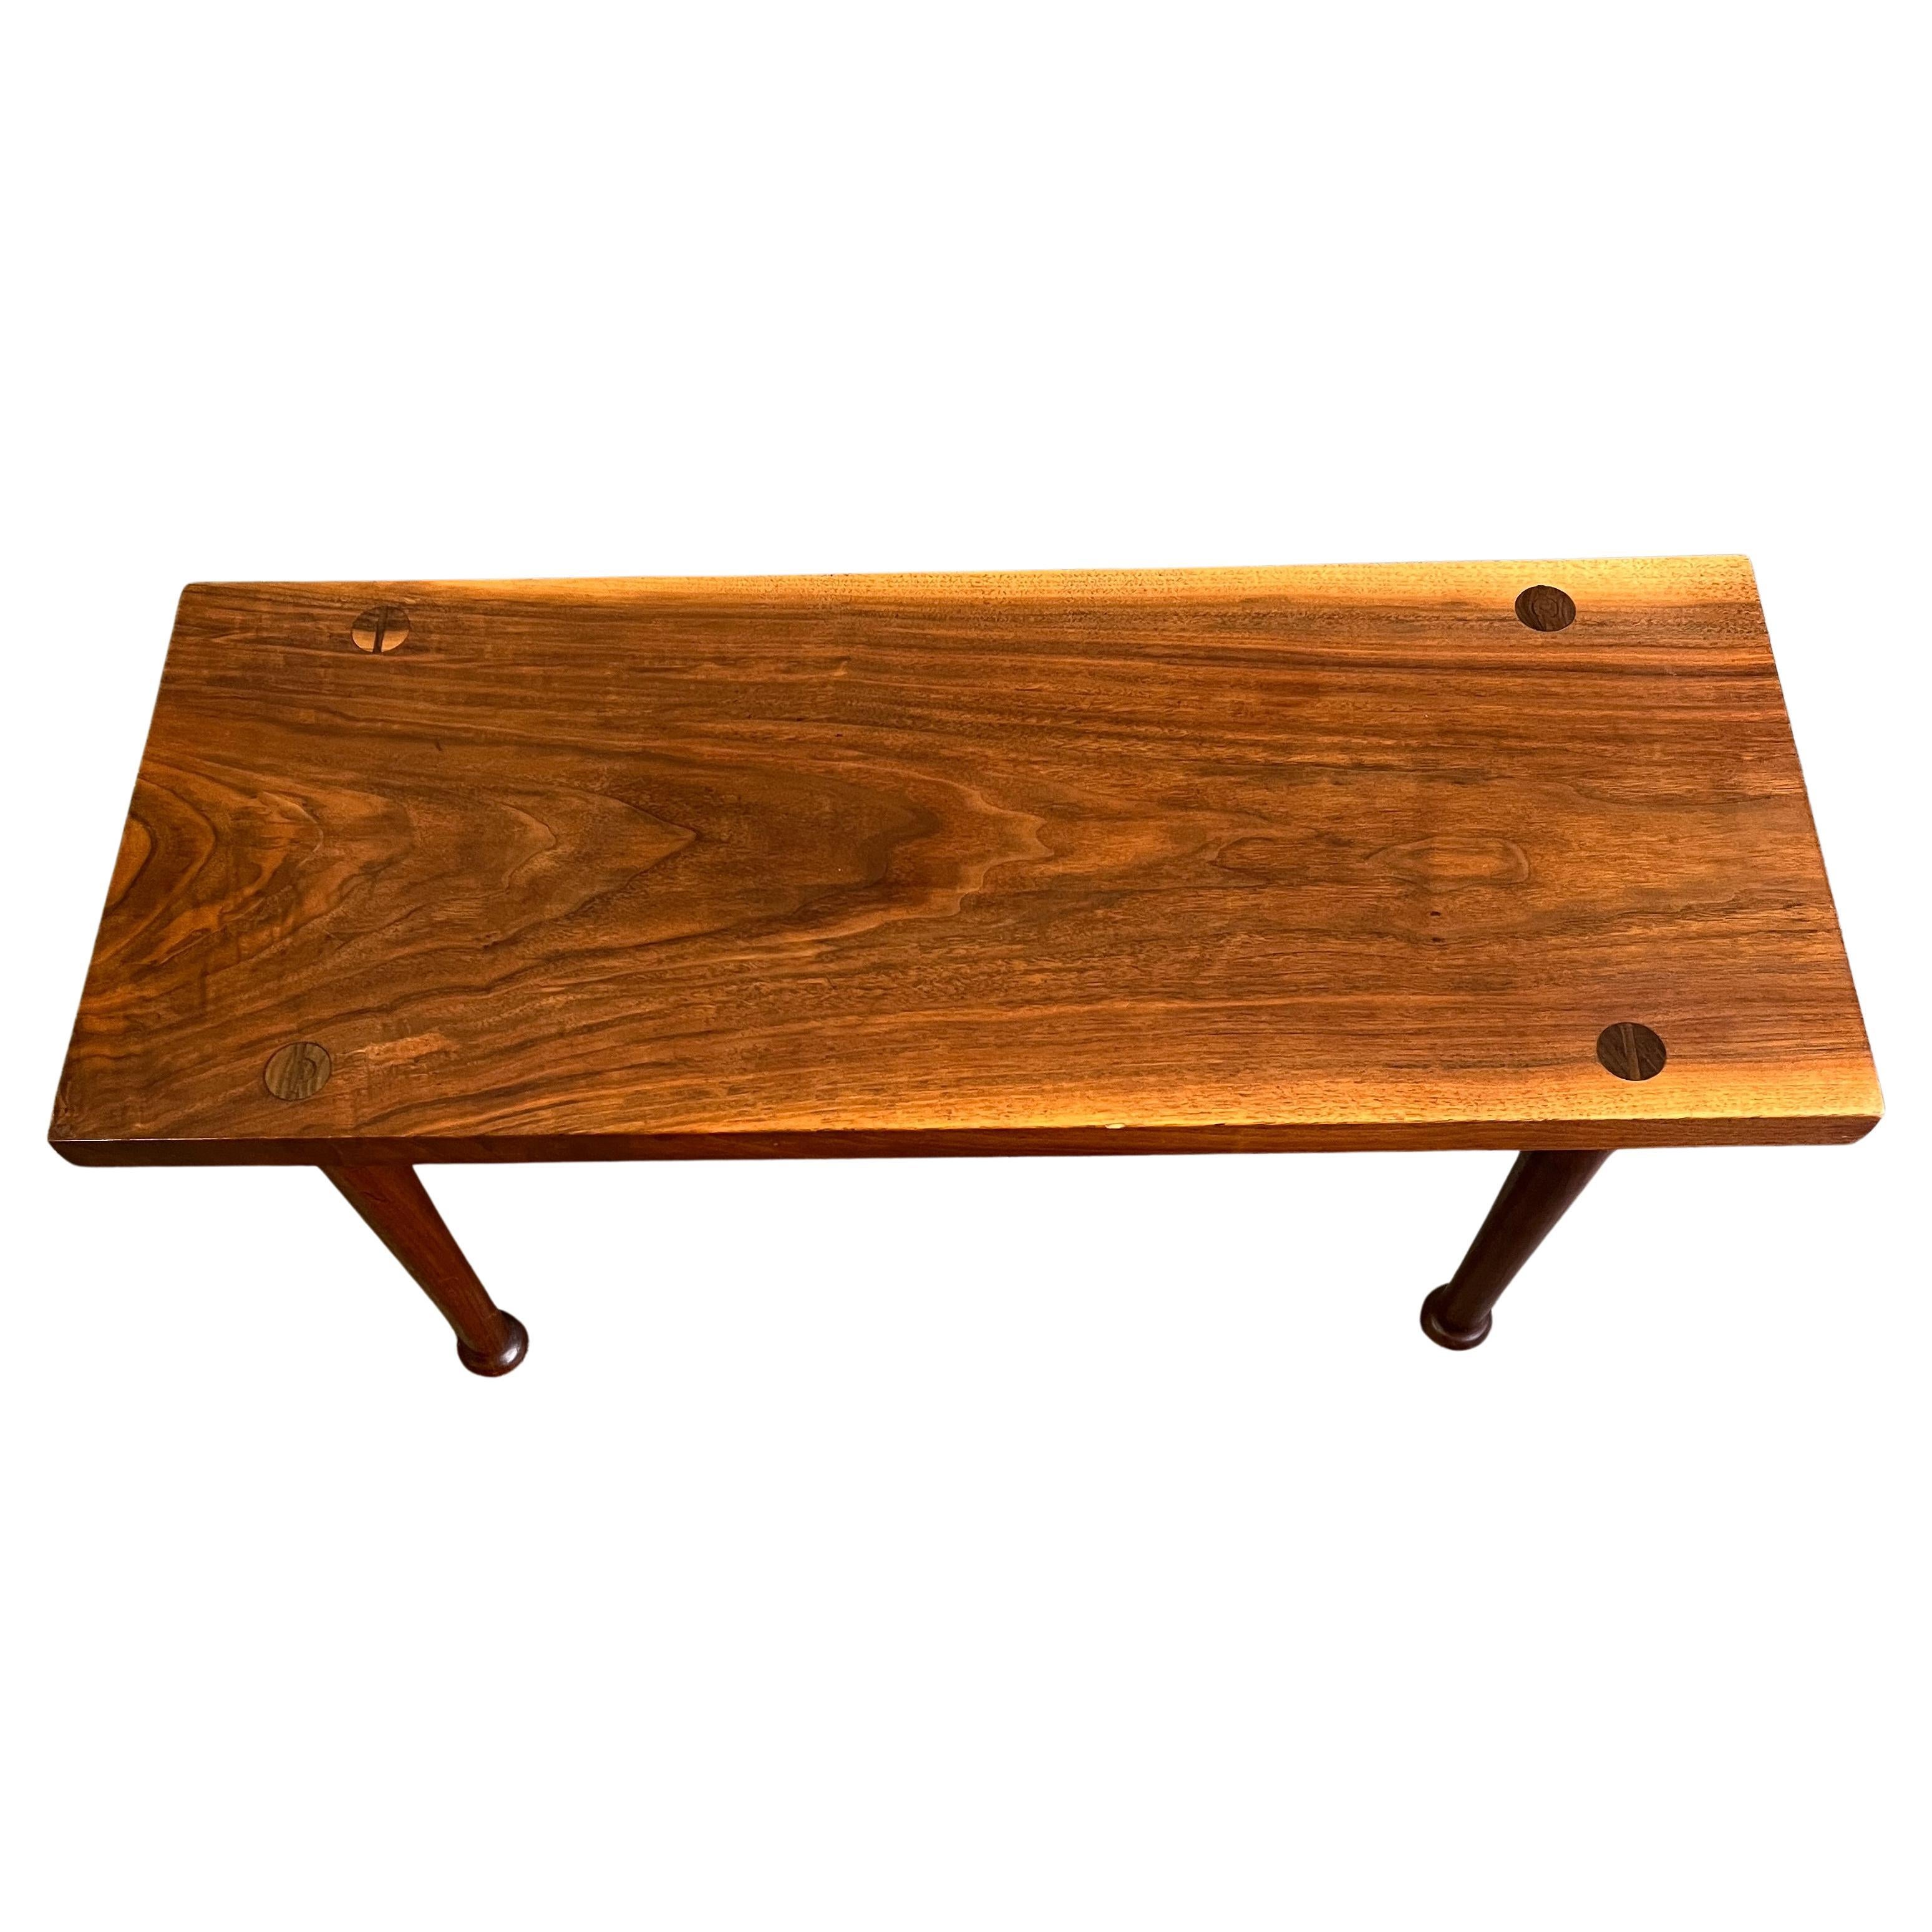 American Studio Craft Walnut Bench or Coffee Table Phillip Powell For Sale 7